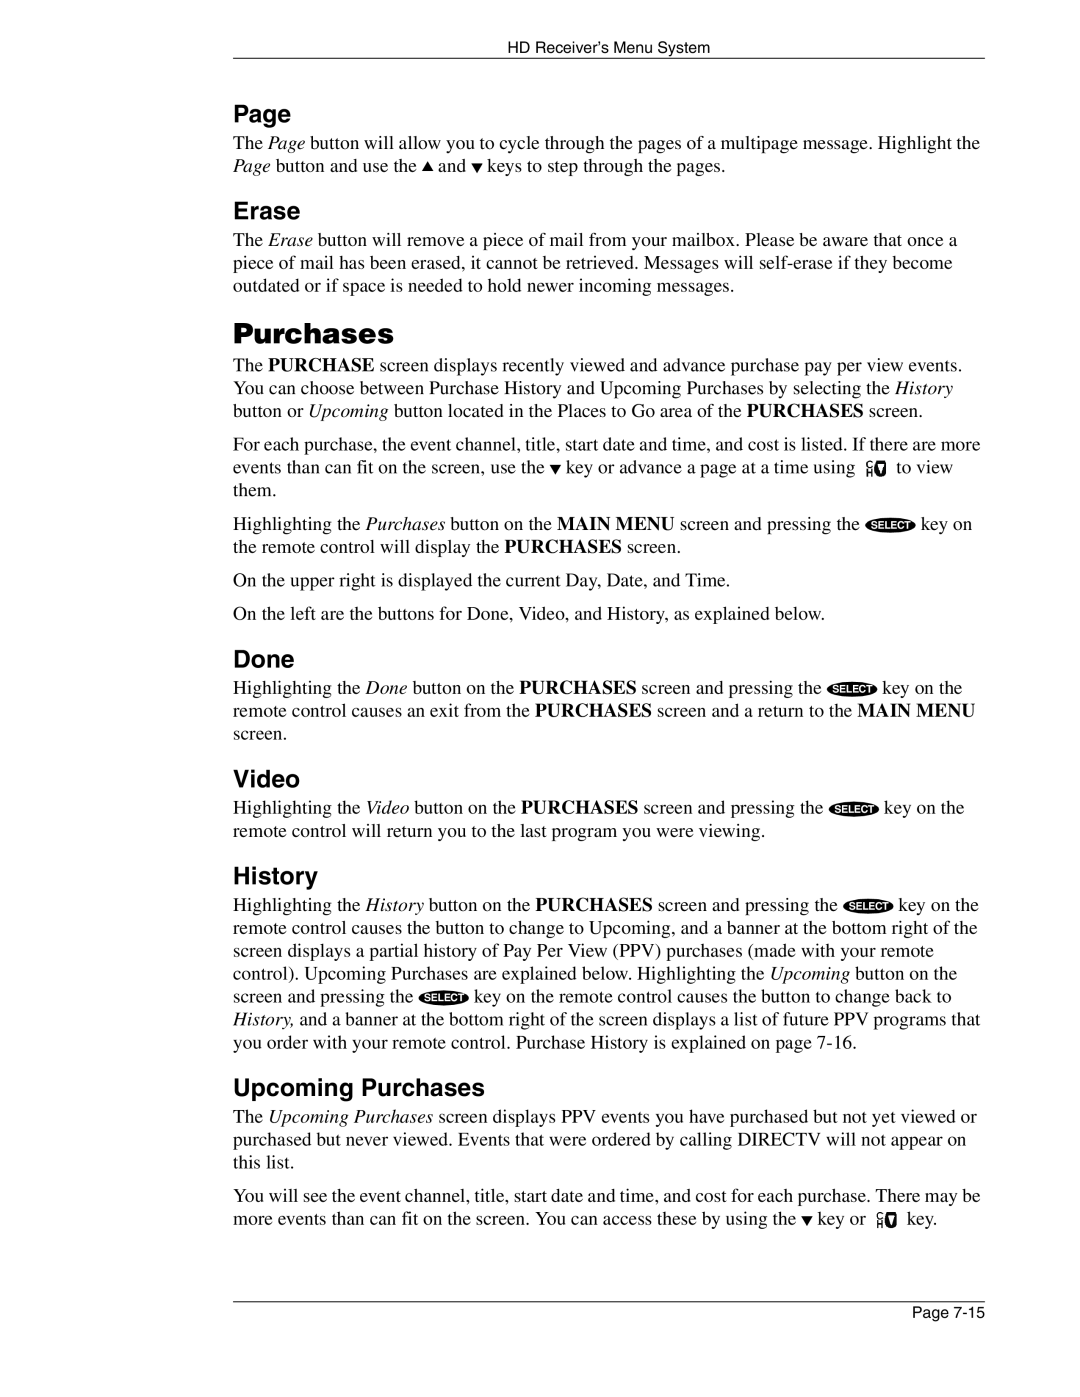 DirecTV HIRD-E86 manual Page, Erase, History, Upcoming Purchases, Done, Video 